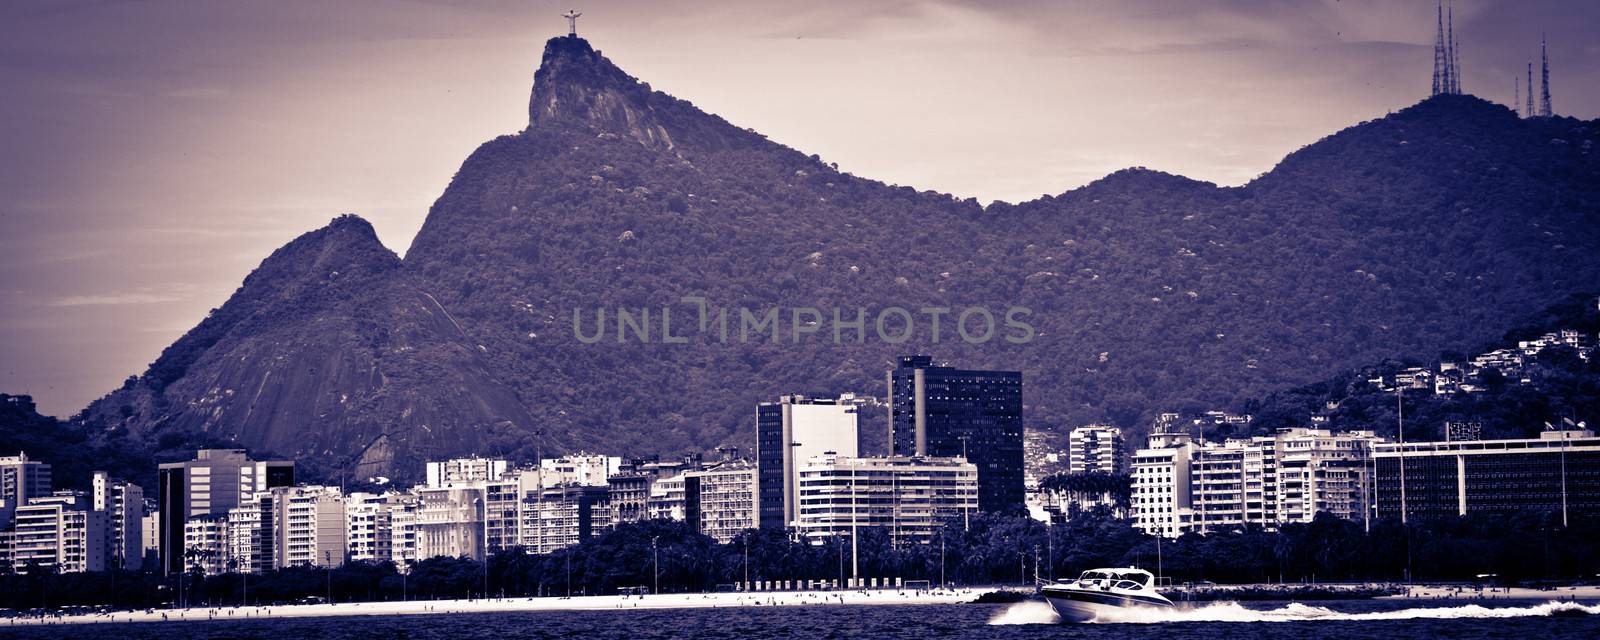 Panoramic view of Rio de Janeiro city coastline with Christ the Redeemer statue on mountains in background viewed from Guanbara bay, Brazil.